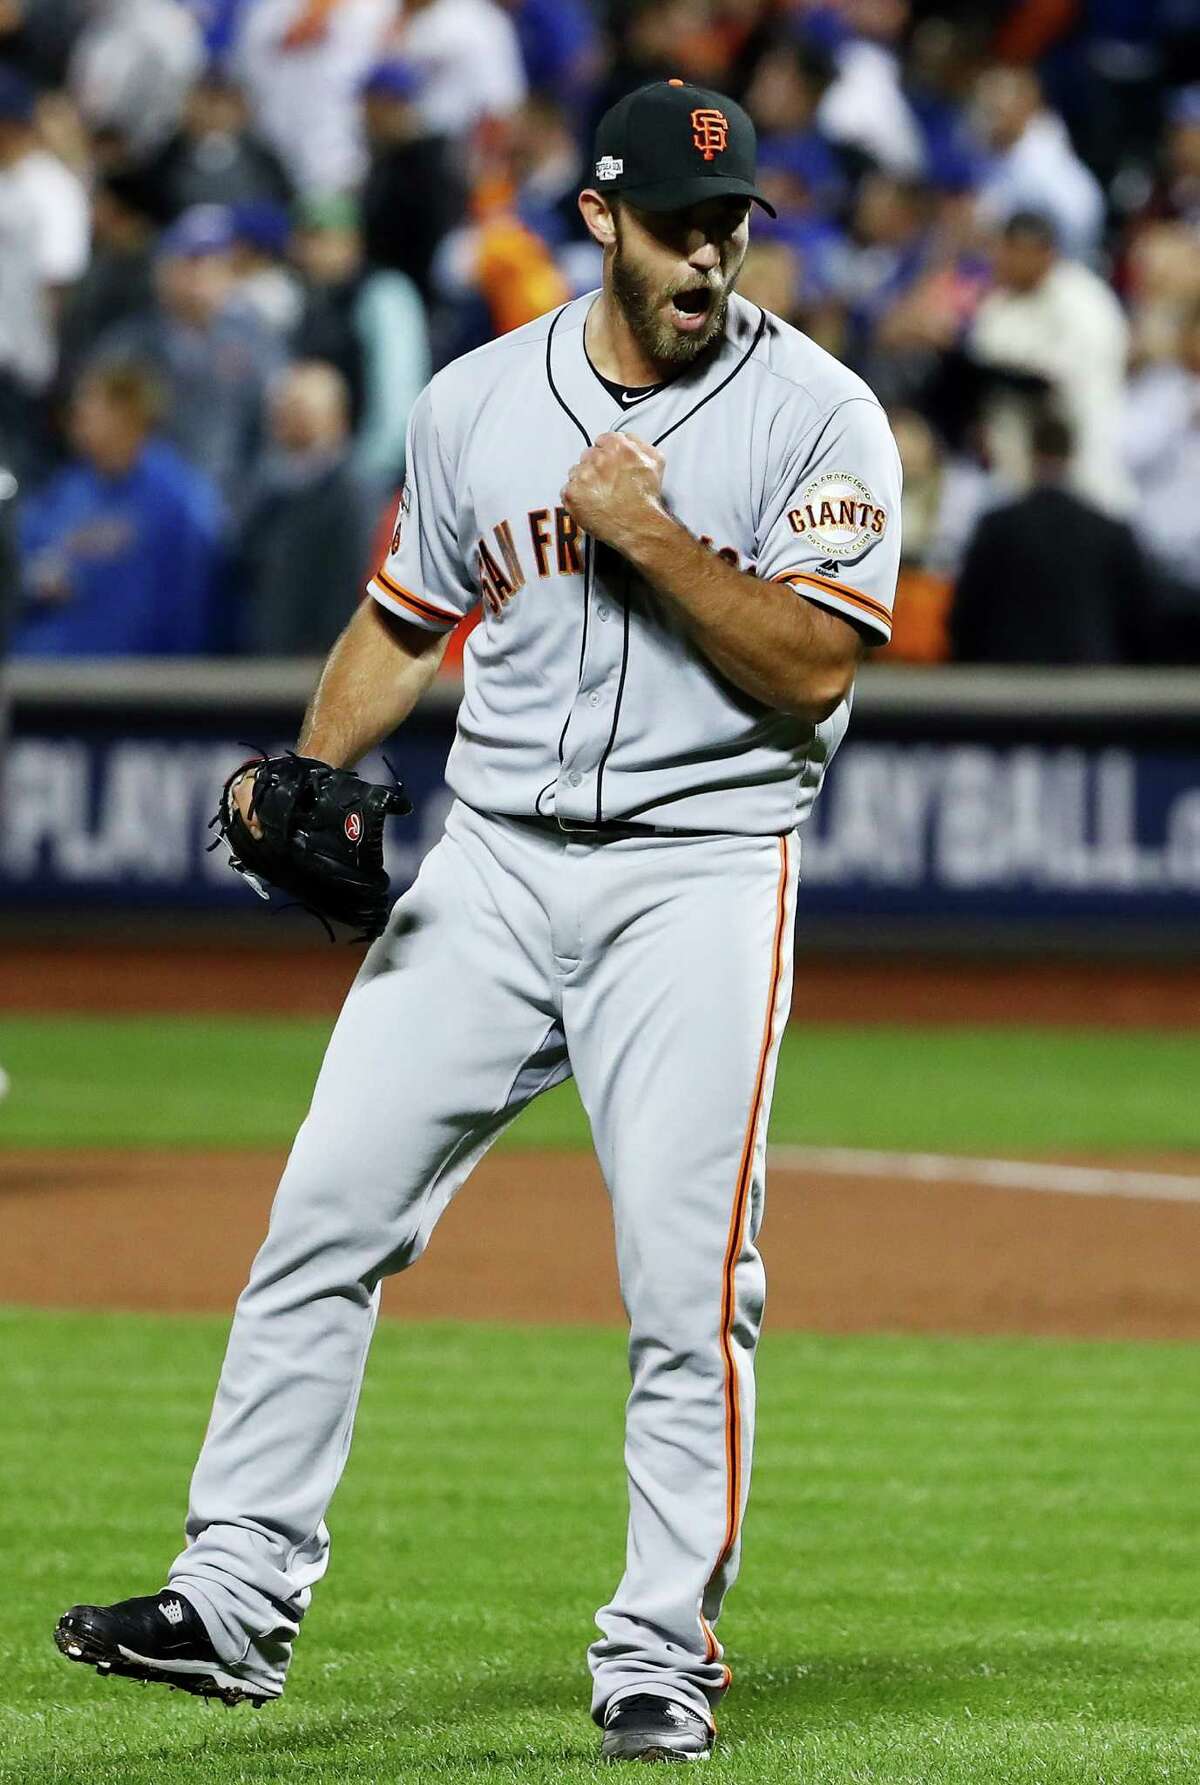 The Giants' heroes were unlikely and expected as No. 8 hitter Conor Gillaspie, left, smacked a three-run homer in the ninth inning to back the shutout pitching of postseason stalwart Madison Bumgarner.